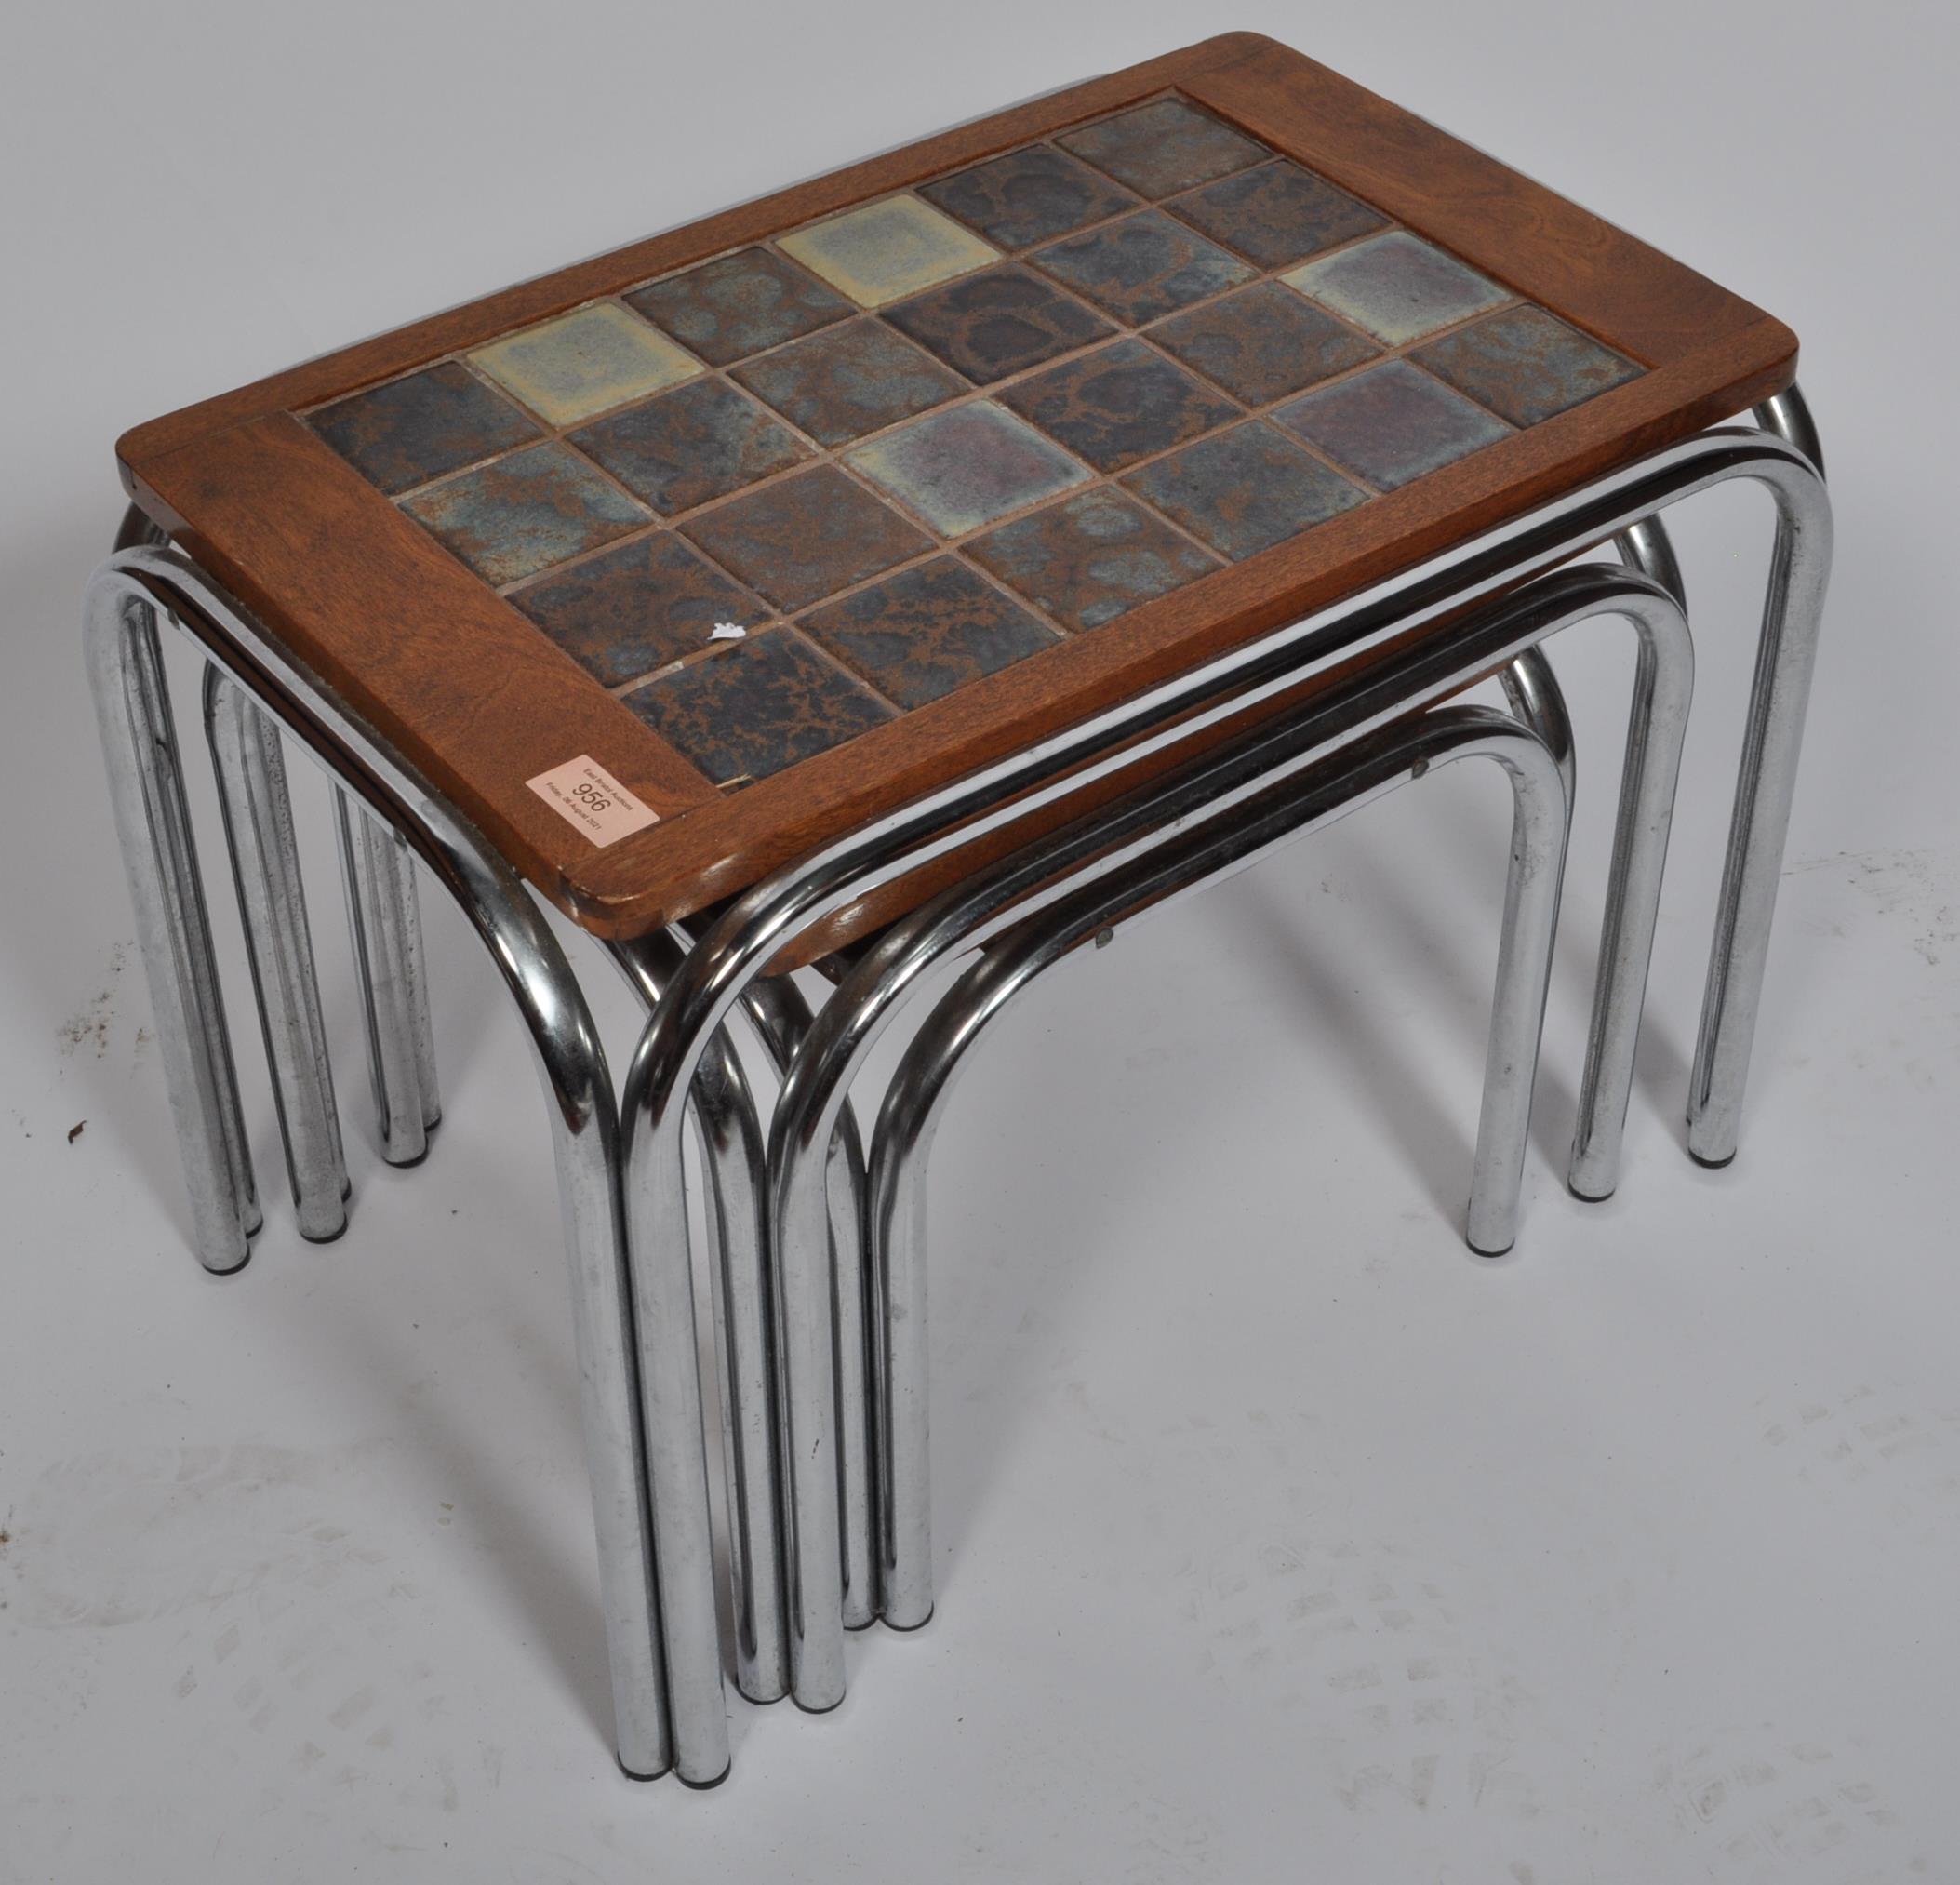 VINTAGE 20TH CENTURY TILE TOP NEST OF TABLES BY MEREDEW - Image 2 of 4